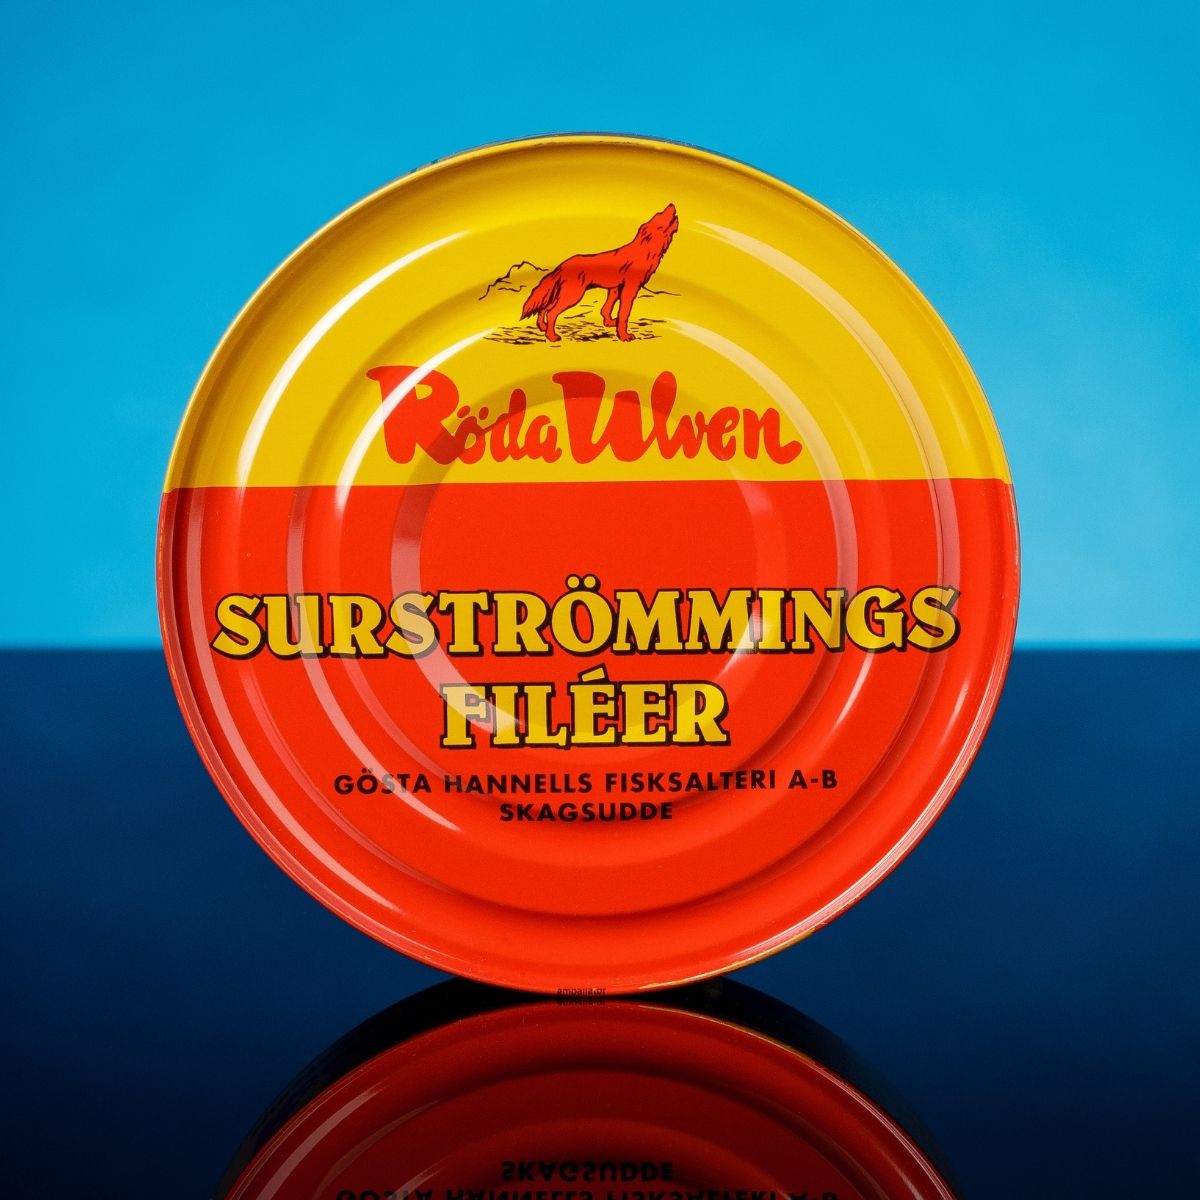 Compare prices for Oskars Surströmming across all European  stores